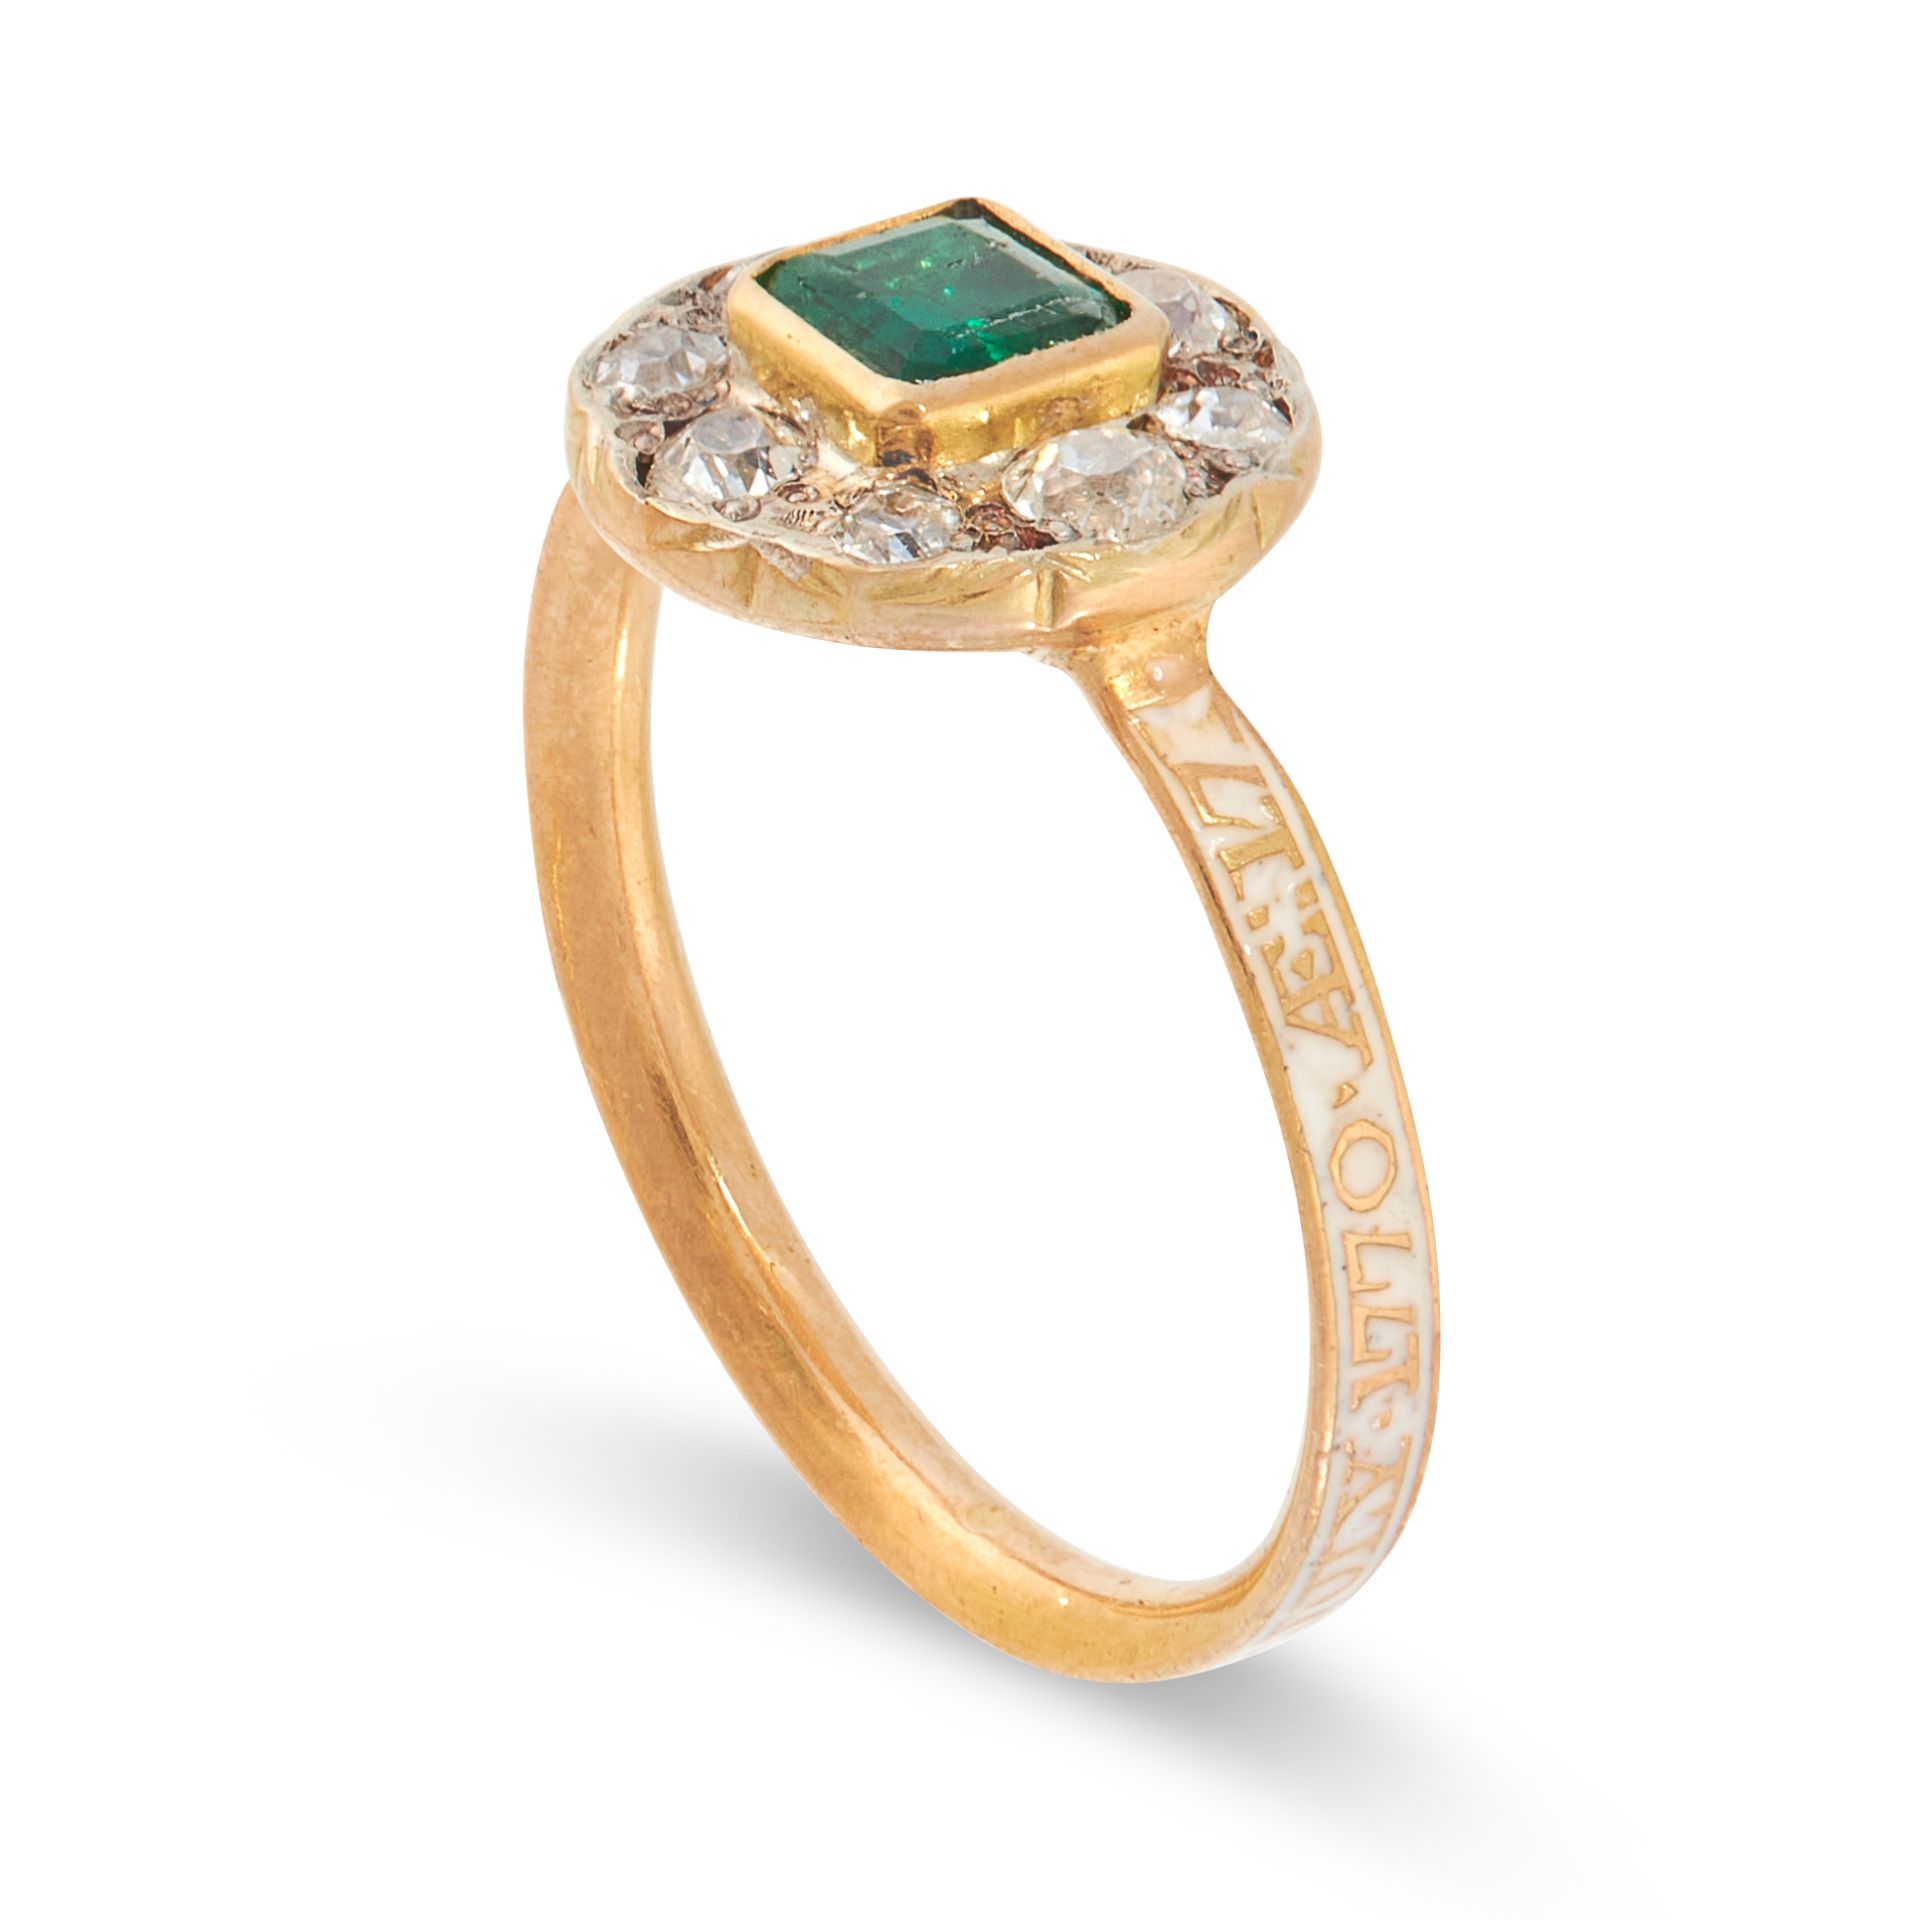 AN ANTIQUE EMERALD, DIAMOND AND ENAMEL MOURNING RING, CIRCA 1770 in high carat yellow gold, set with - Image 2 of 2